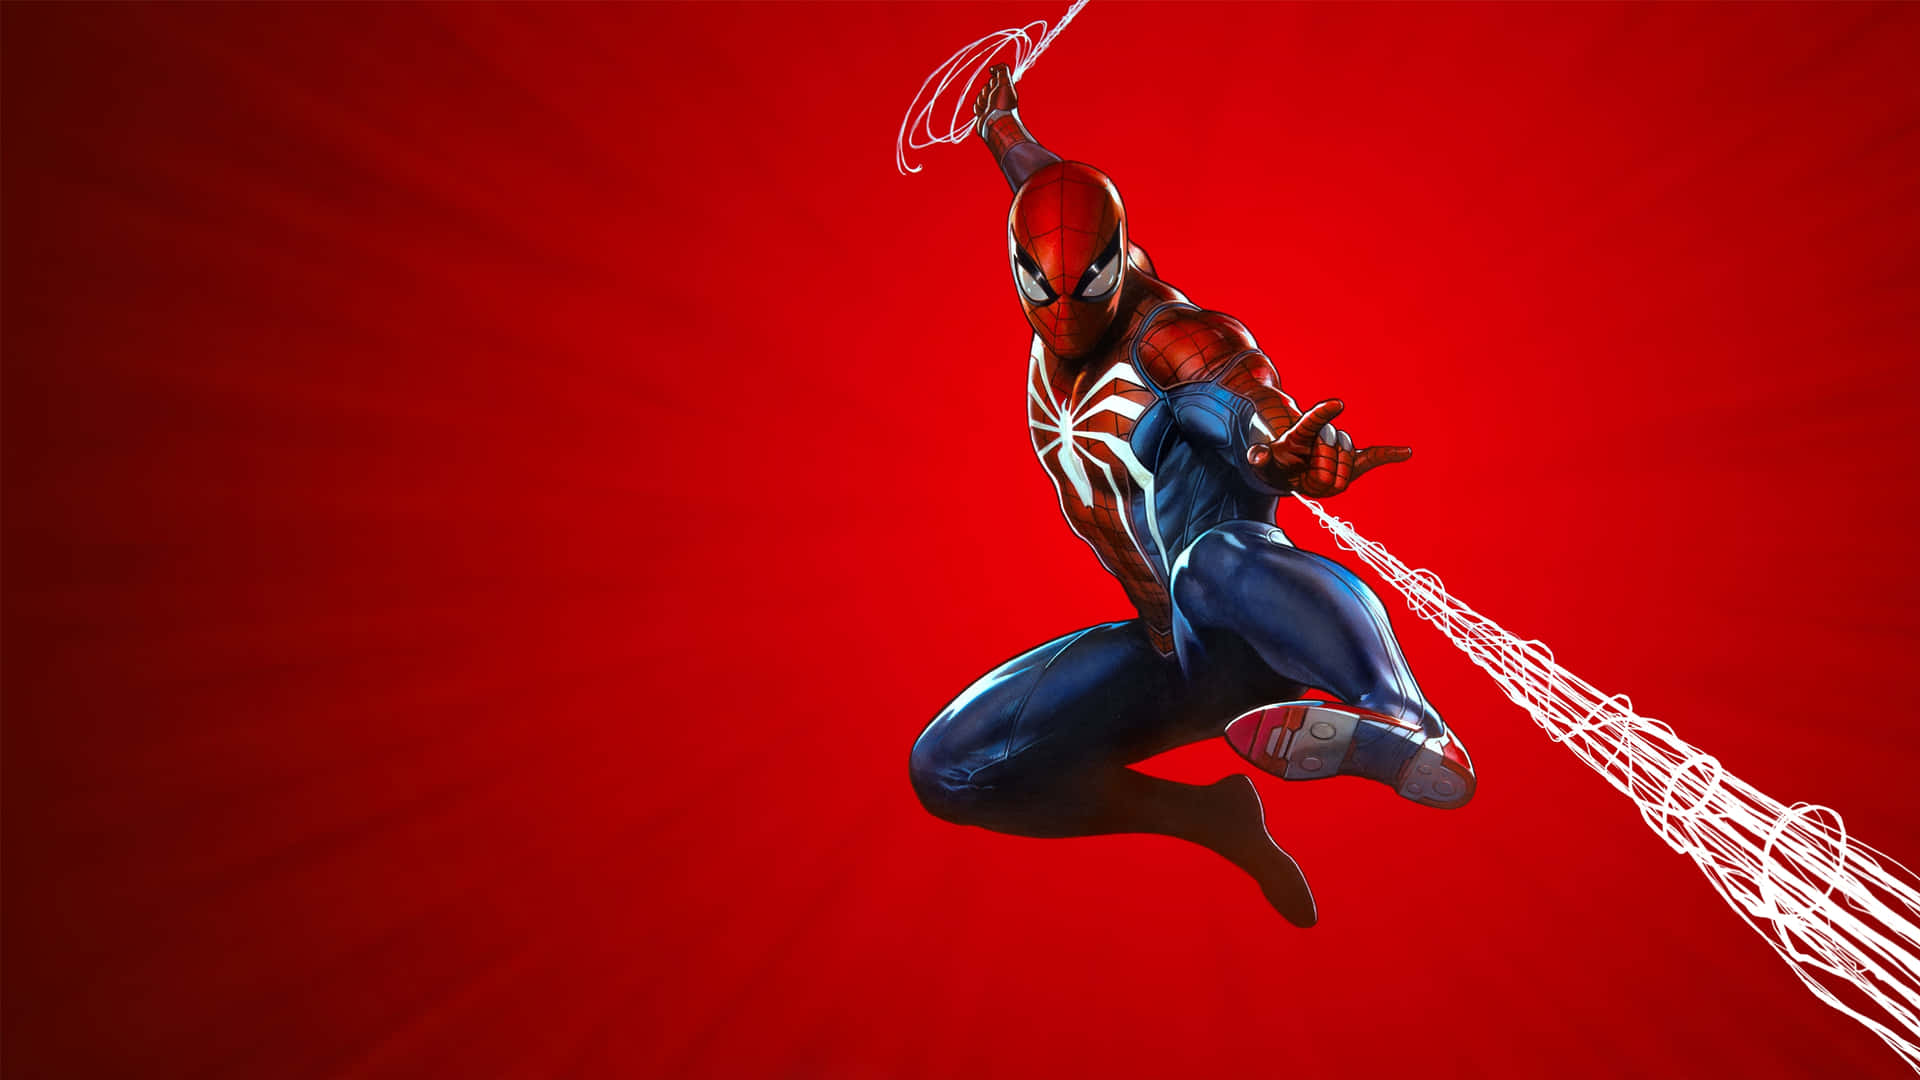 Cool Ps4 Game Character Spider-man With Famous Jump Pose